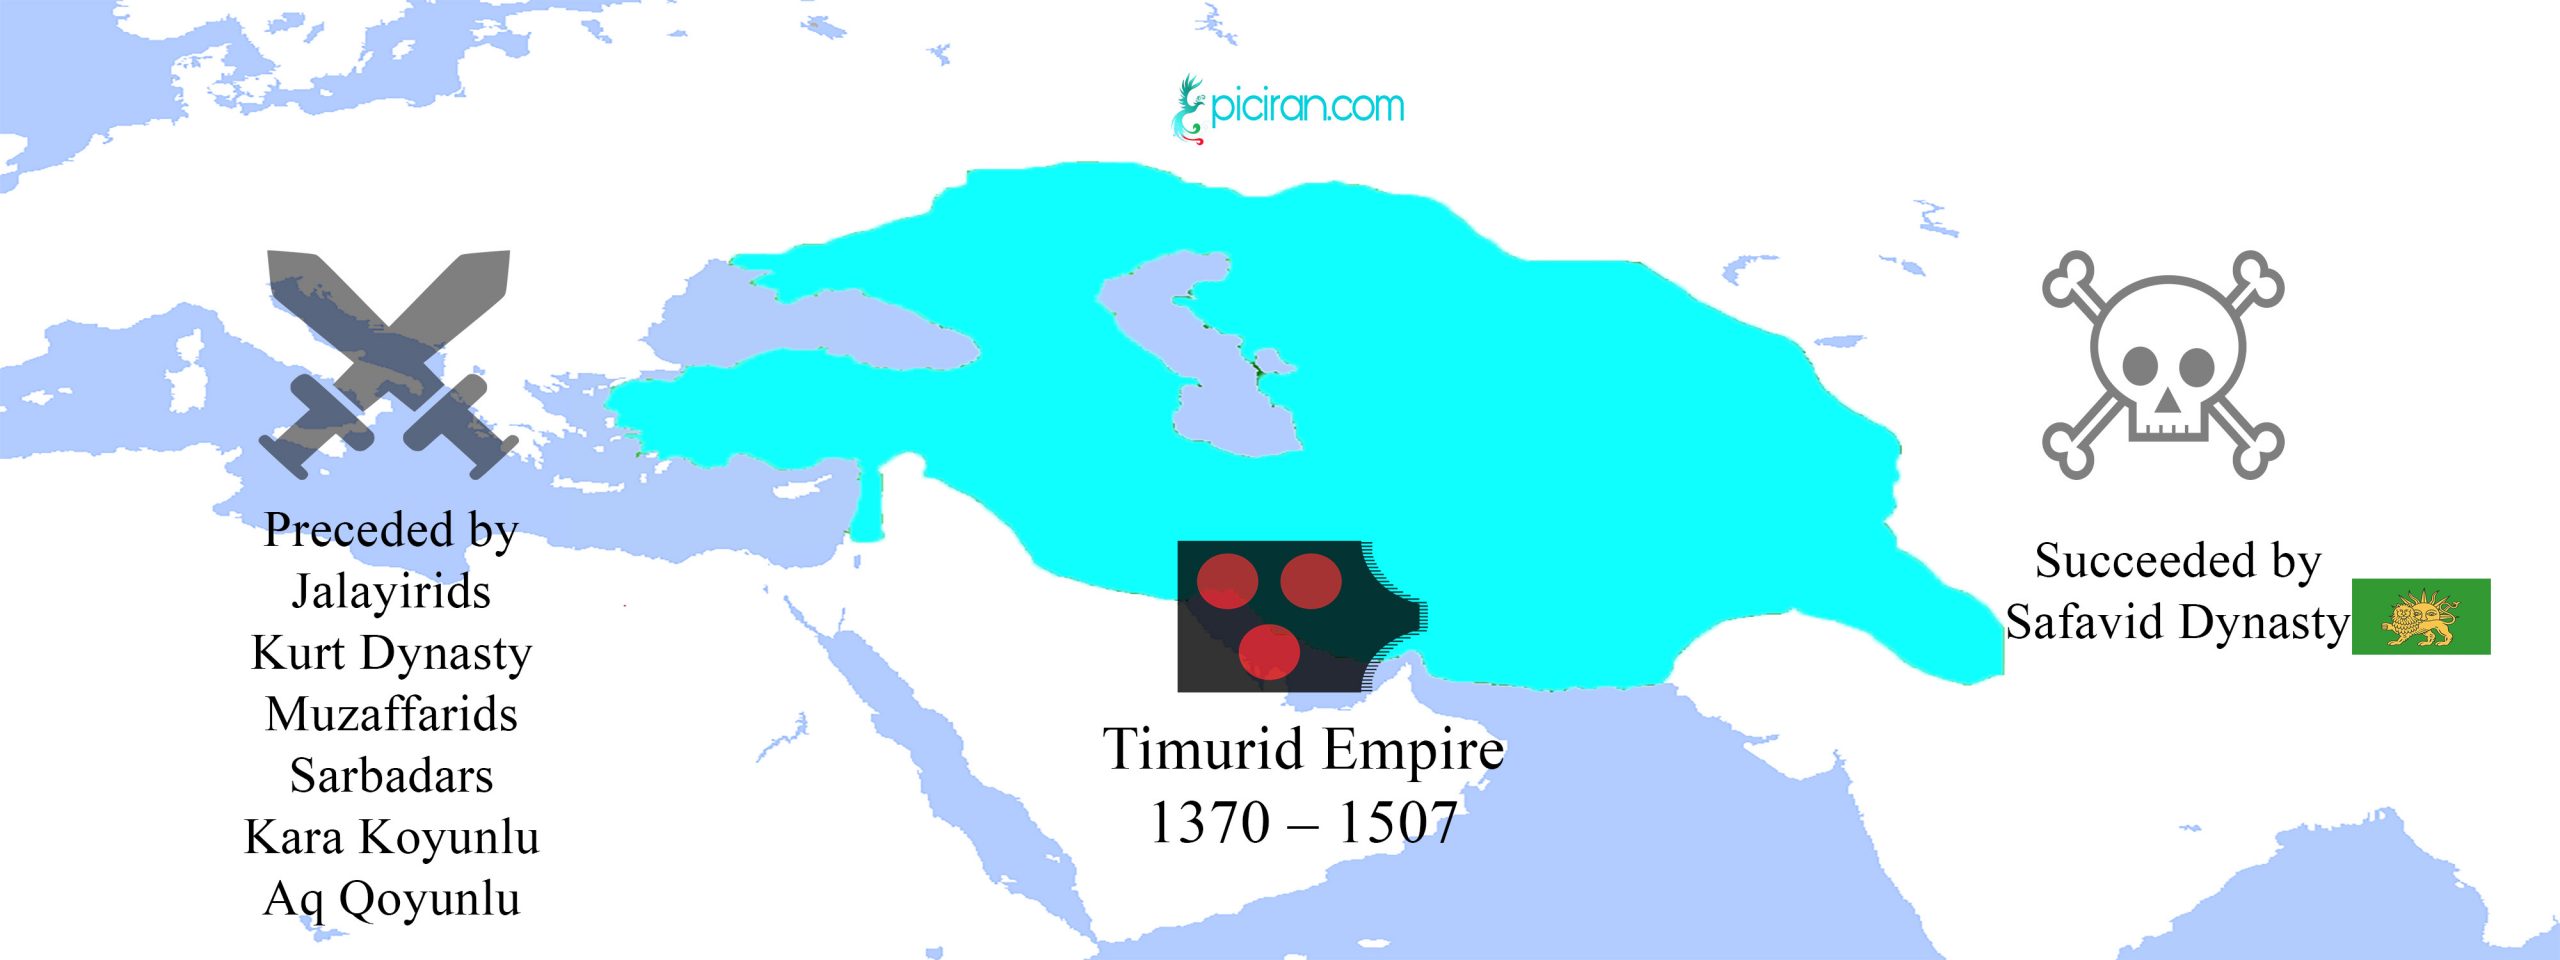 Timurid Empire in Iran – Another horrific invasion after Mongols